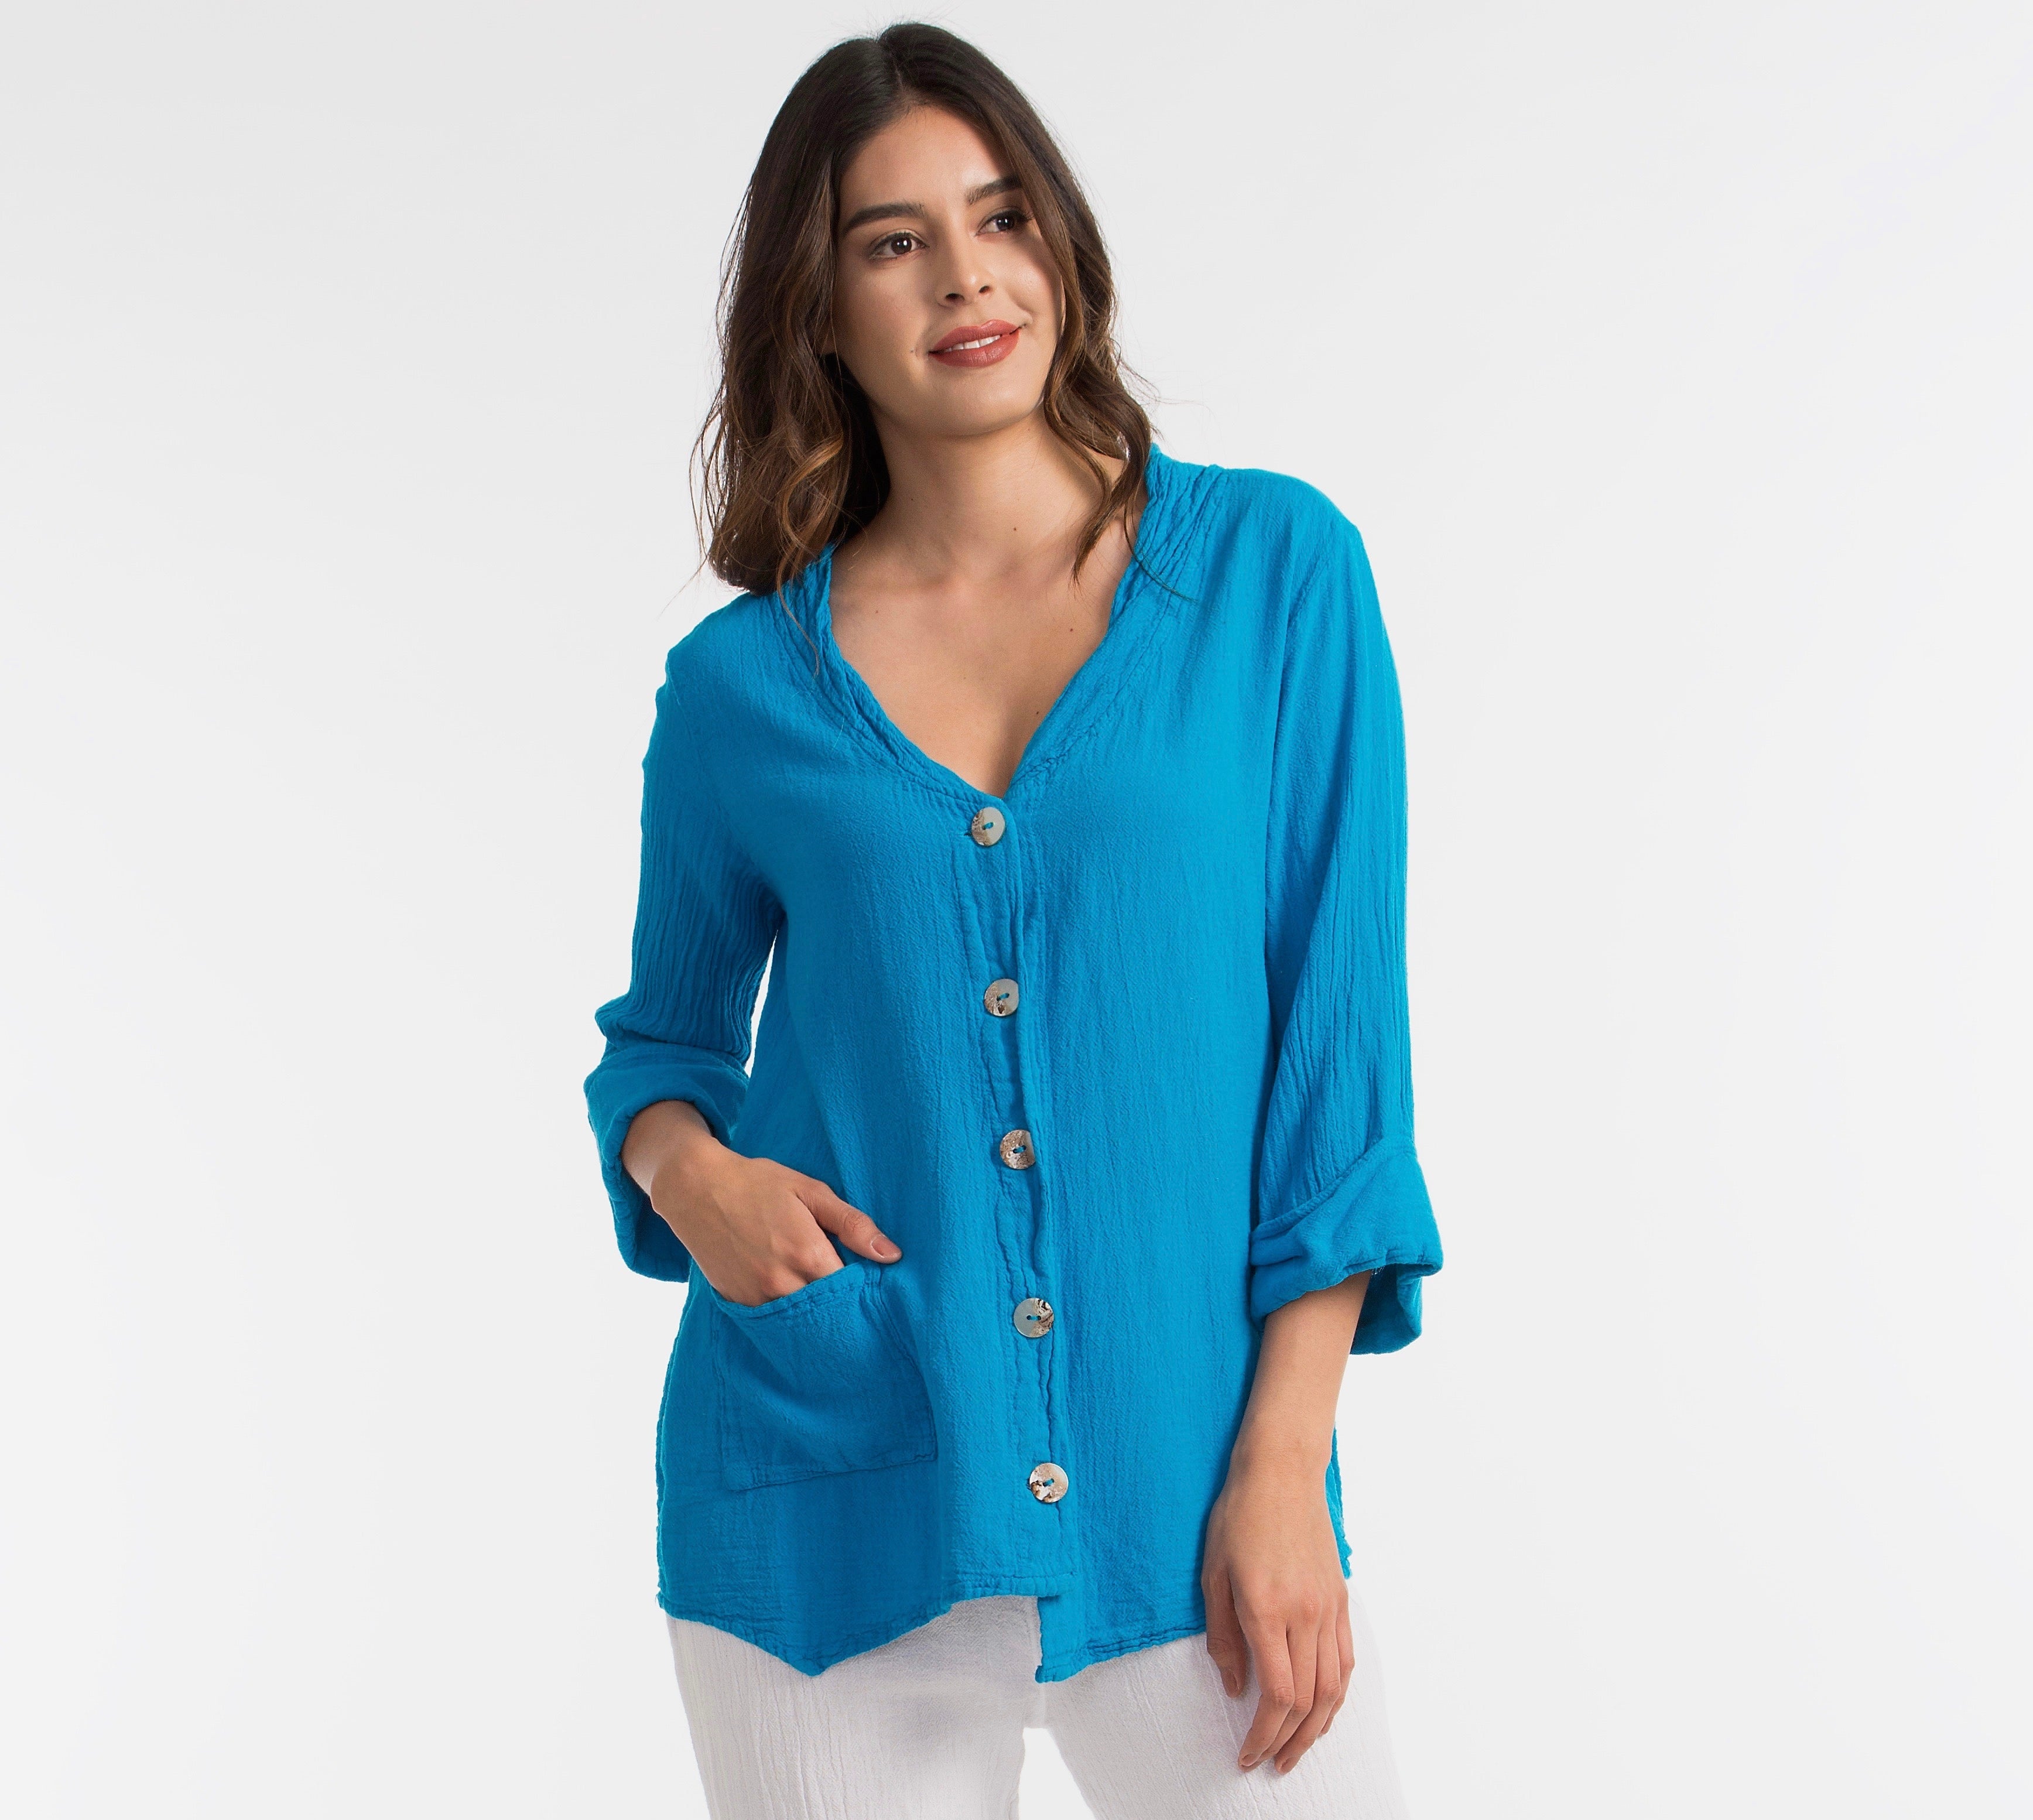 Tammy- Jacket/Top for every Occasion 100% Cotton Gauze